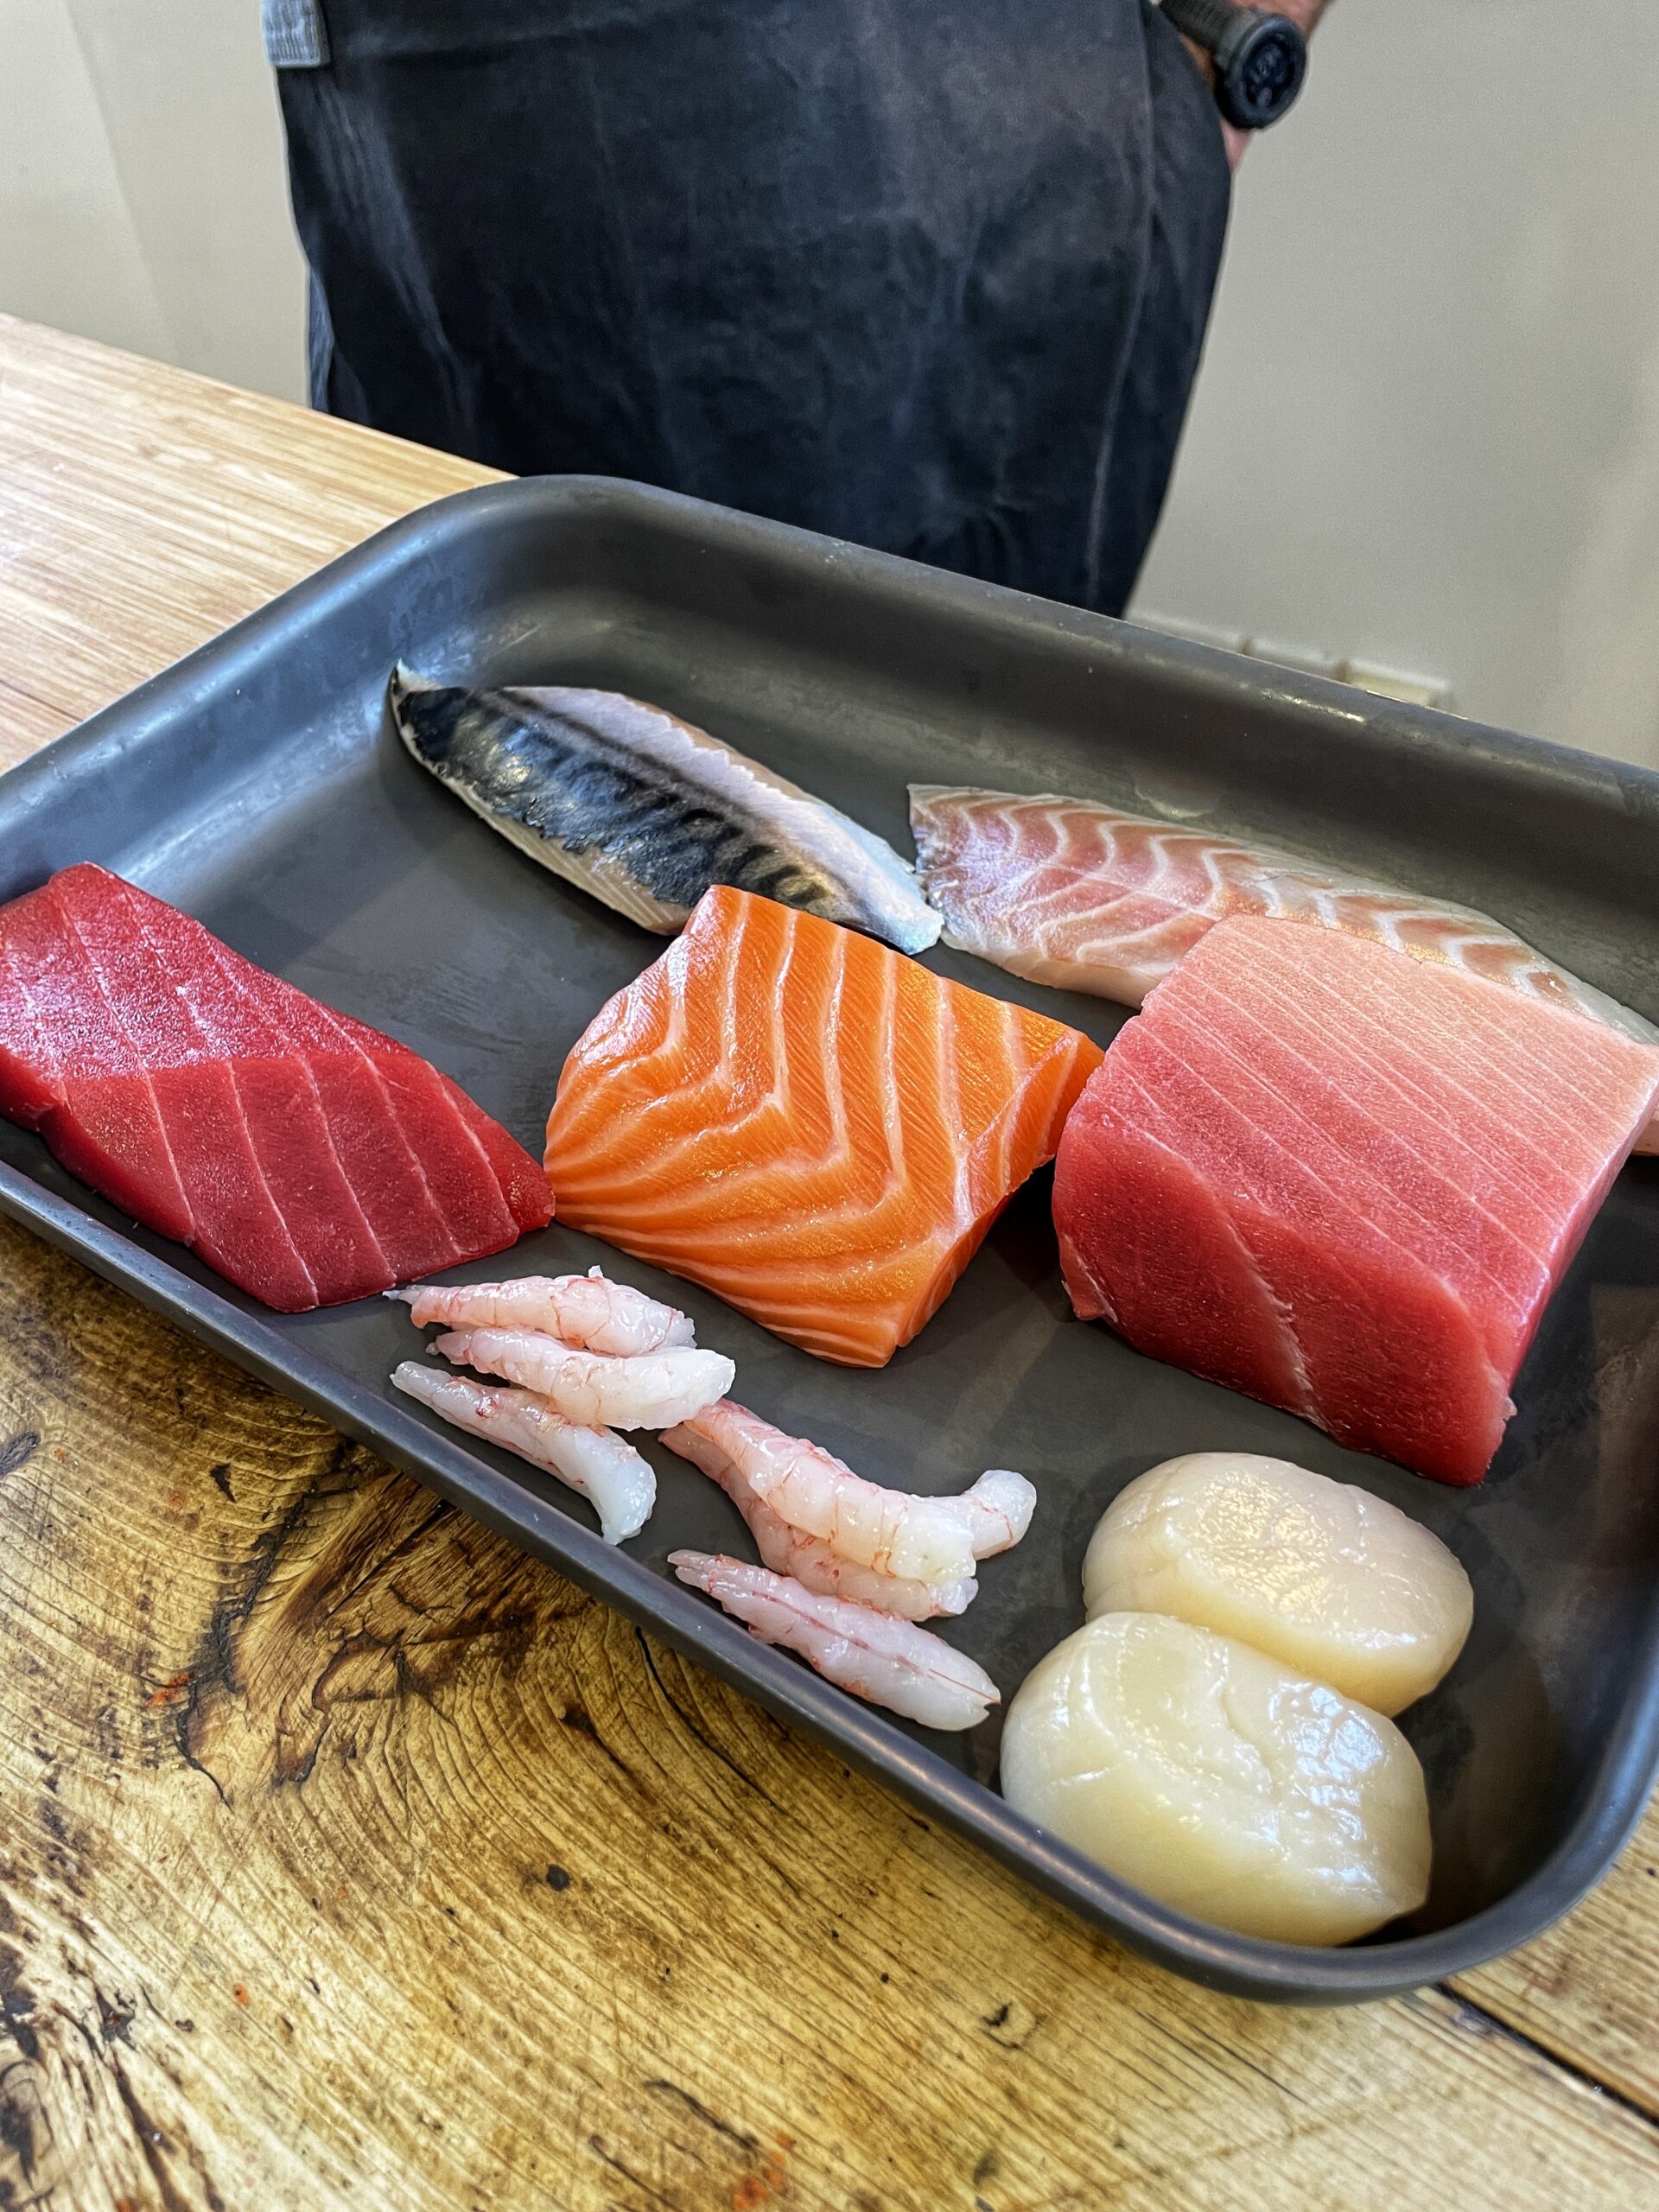 The day's catch at Sushi Pod